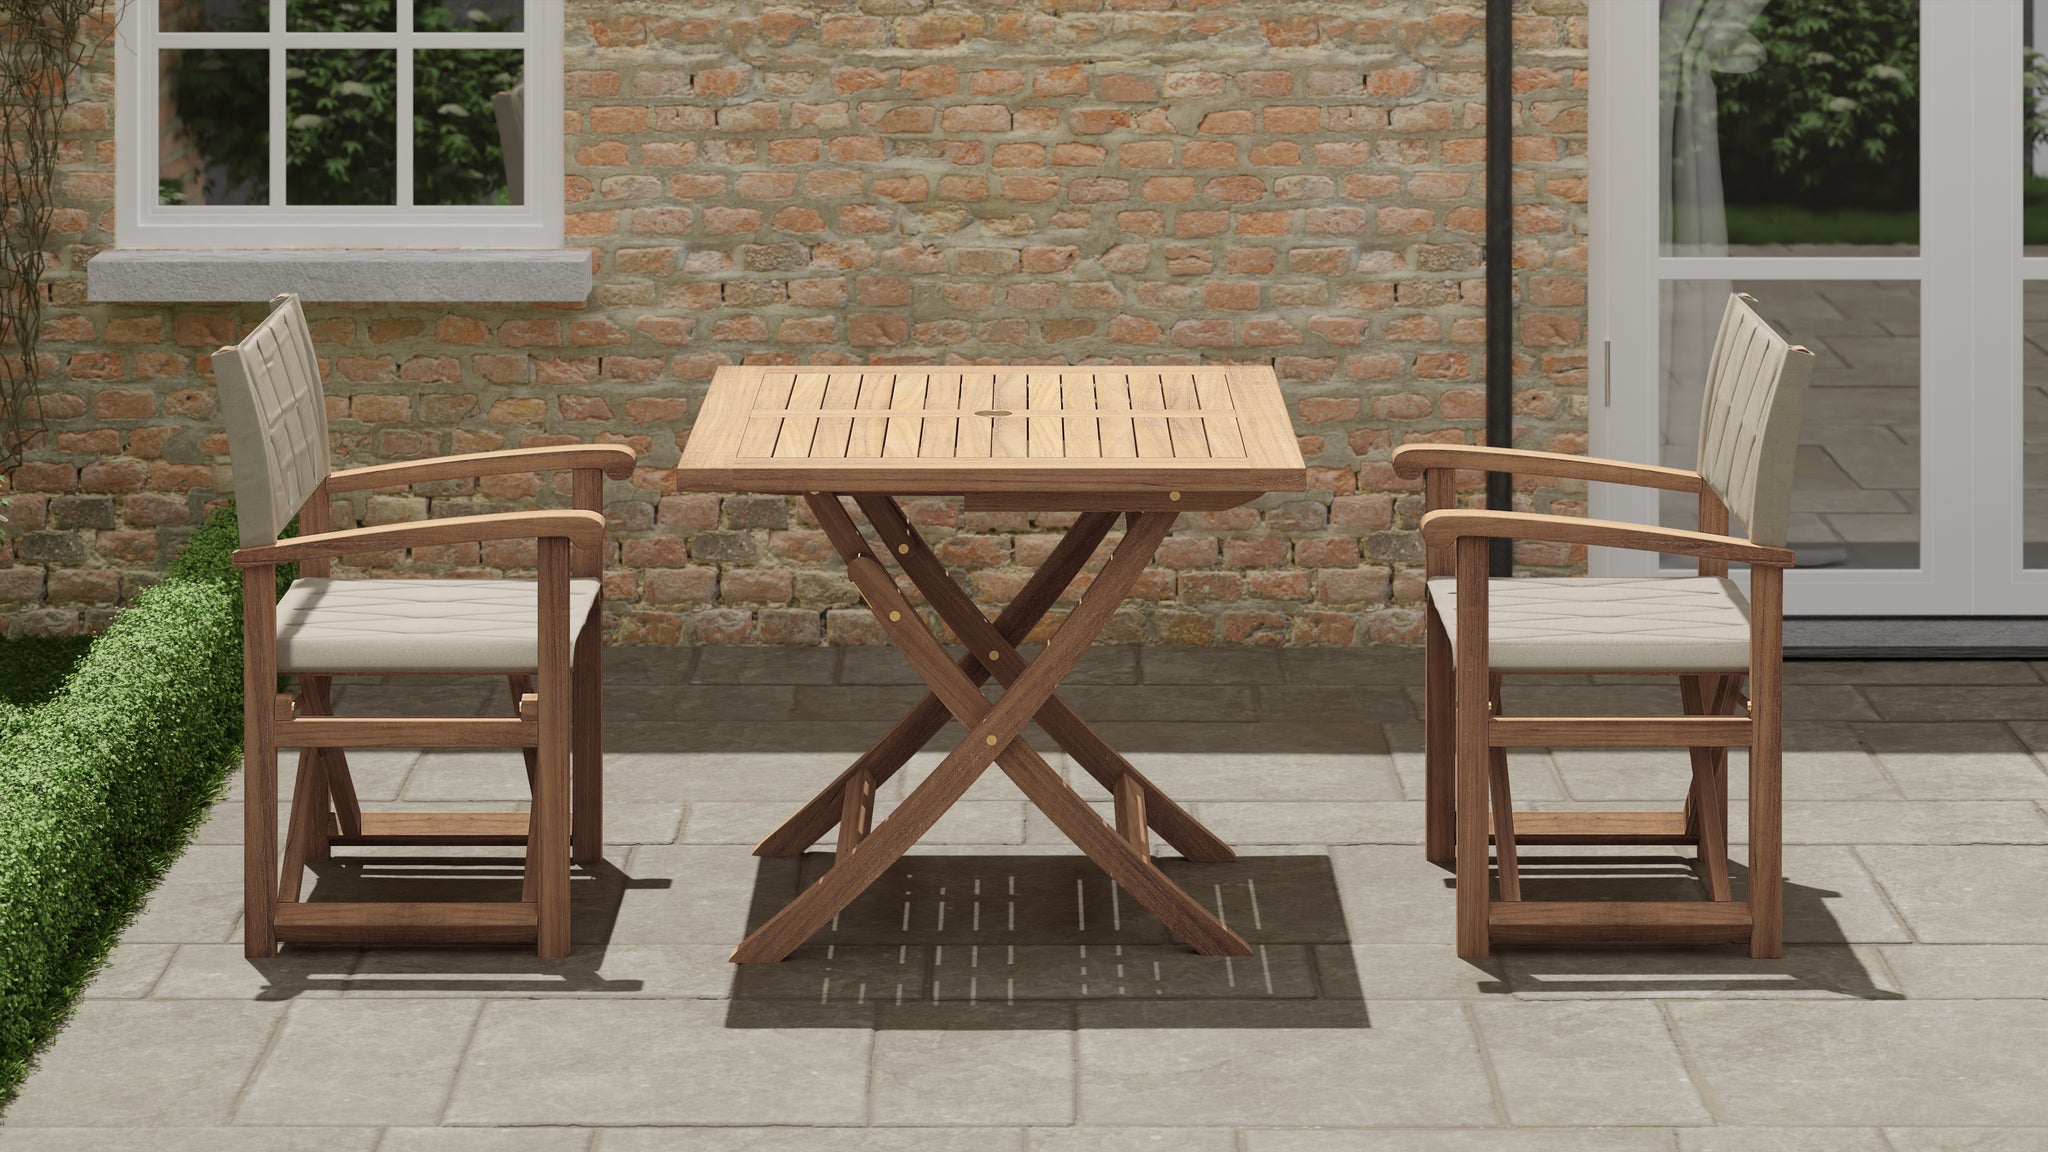 Square Teak Folding Table  with Directors chairs